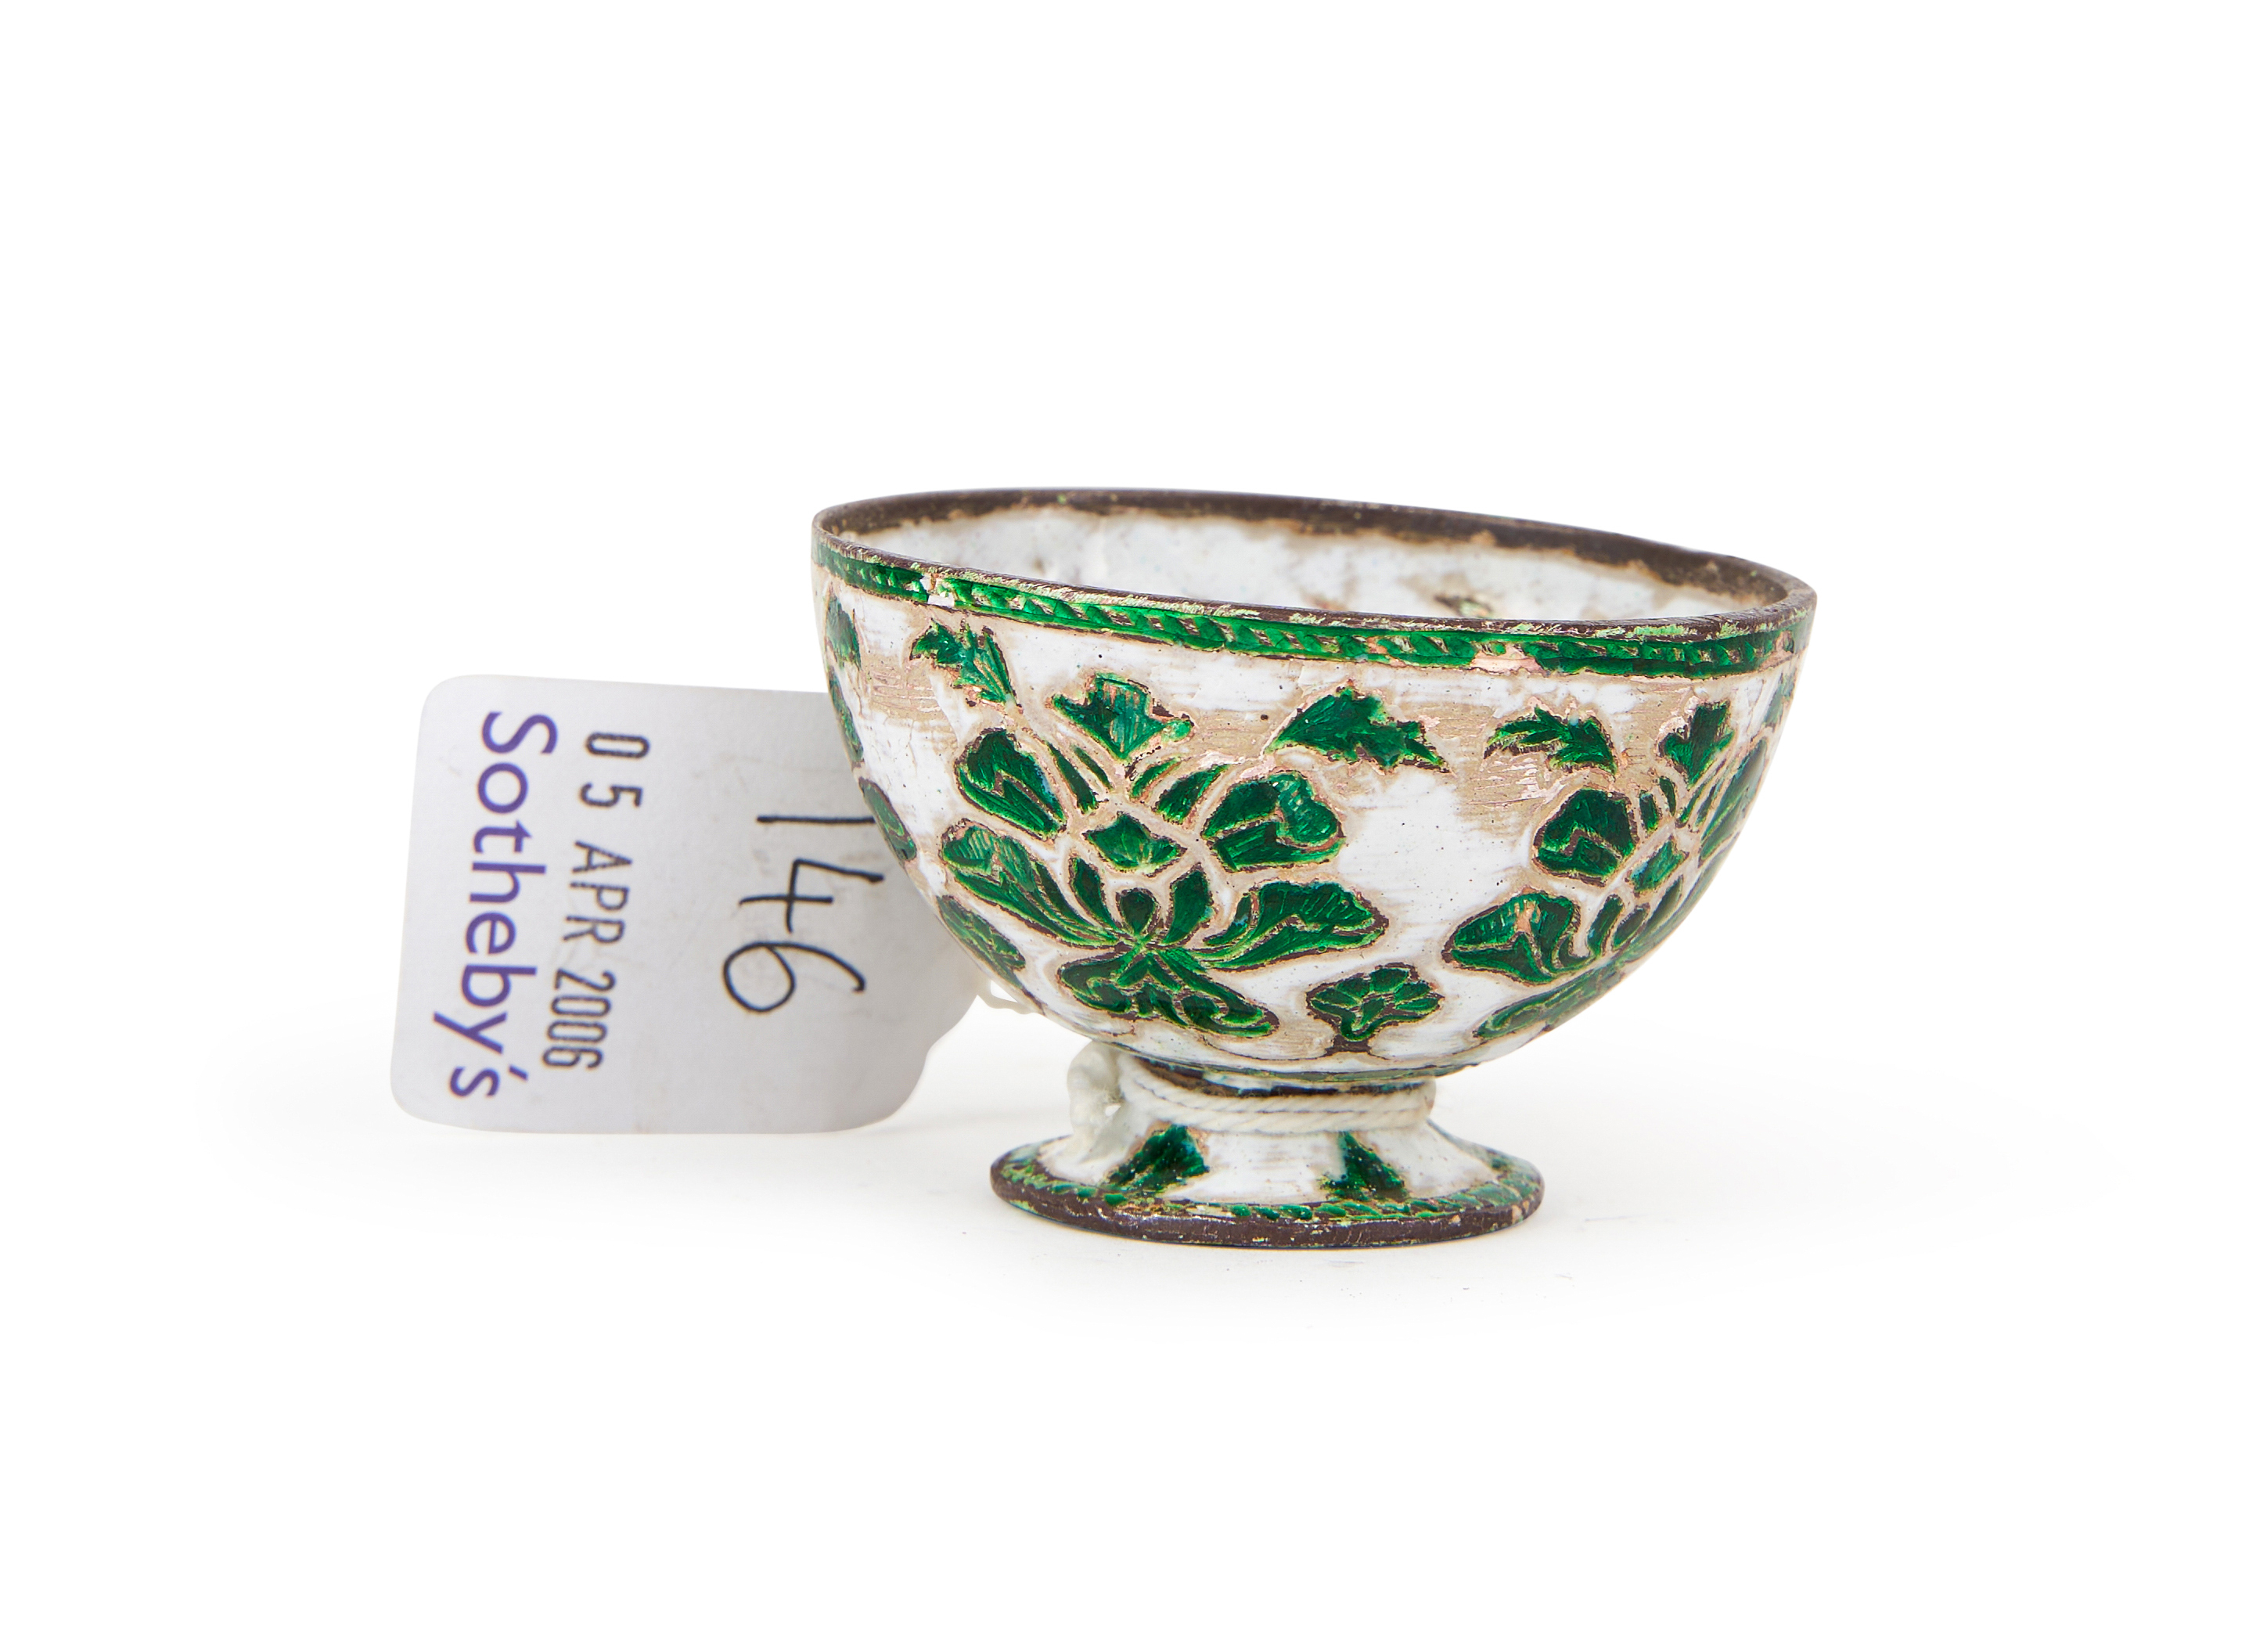 A ROYAL GREEN & WHITE ENAMELLED MUGHAL WINE CUP, 17TH CENTURY, INDIA